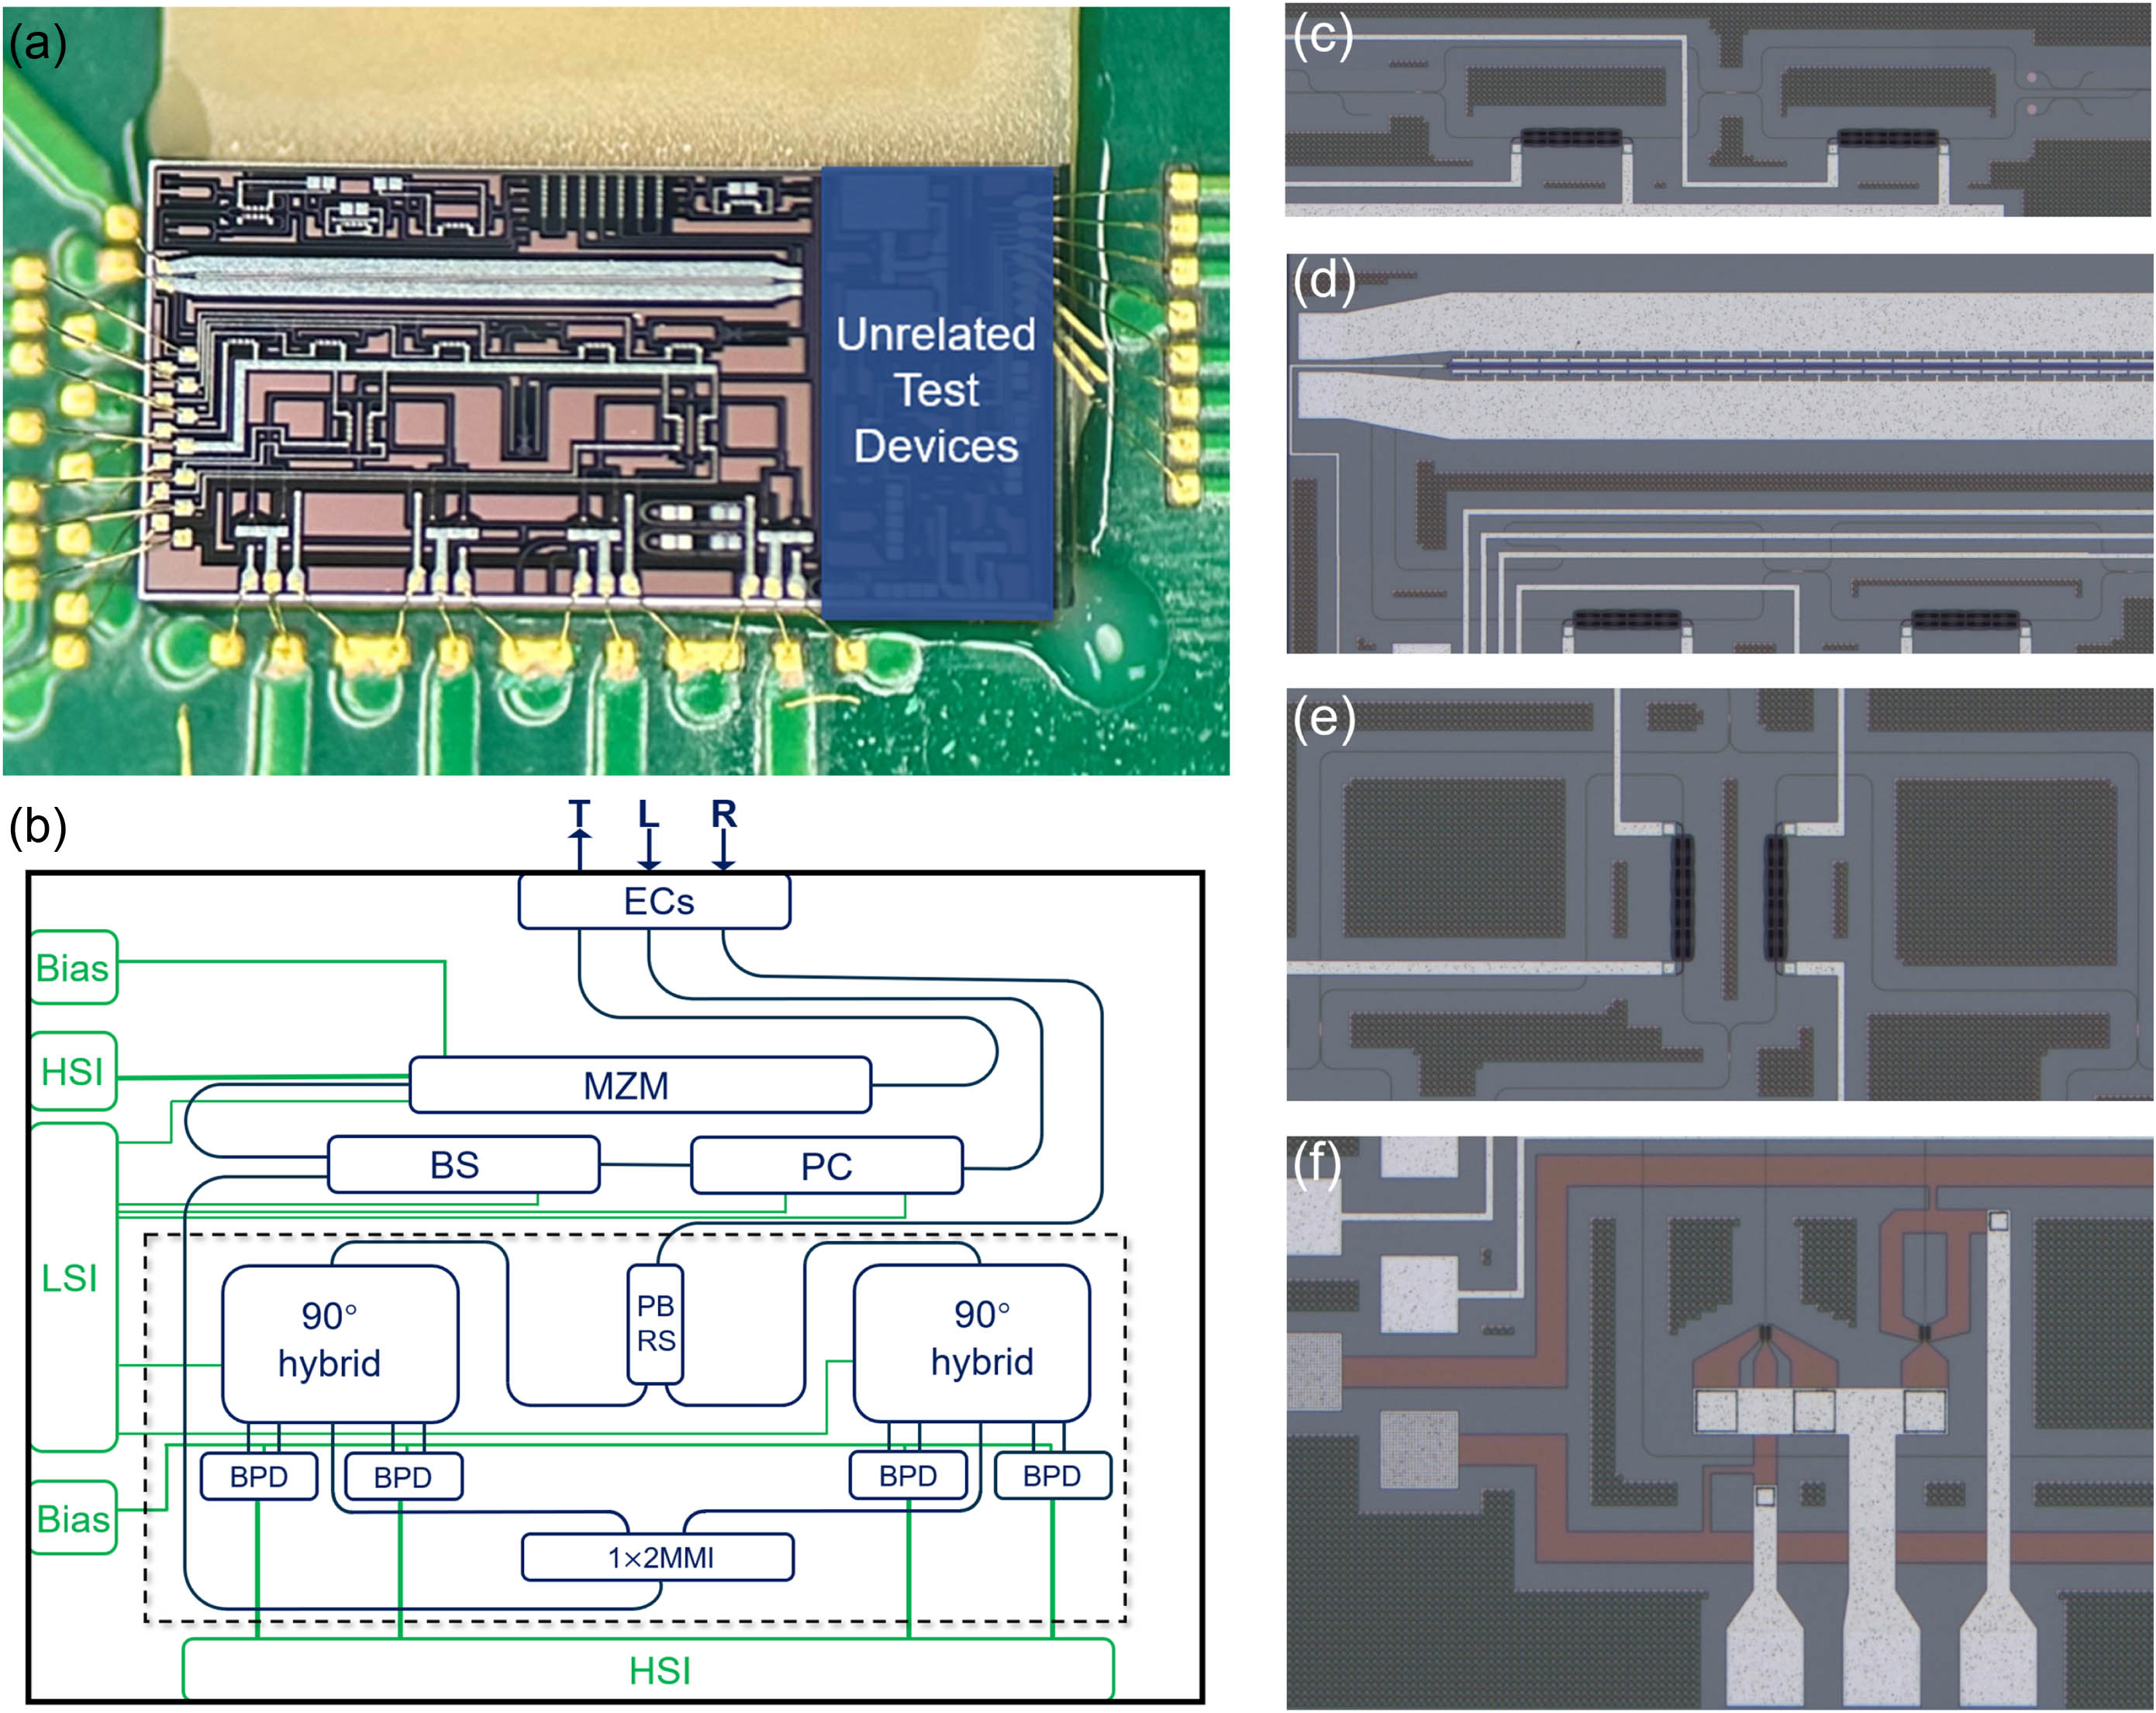 (a) Microscope image of the photonic integrated circuit (PIC). (b) Schematic of the PIC. EC, edge coupler; PC, polarization controller; BS, beam splitter; MZM, Mach–Zehnder modulator; PBRS, polarization beam rotator splitter; MMI, multimode interferometer; BPD, balanced photodetector; LSI, low-speed electrical interface; HSI, high-speed electrical interface. “L”, “T”, and “R” denote the three edge couplers, serving as the input for the light source, the output for modulated laser pulses, and the input for RBS light, respectively. The arrangement of the elements and waveguides in the sketch is consistent with the chip in practice except for the electrical wires, while the aspect ratio is adjusted for a better view. (c)–(f) Magnified micrographs of the PC, MZM, 90° hybrid, and BPD.